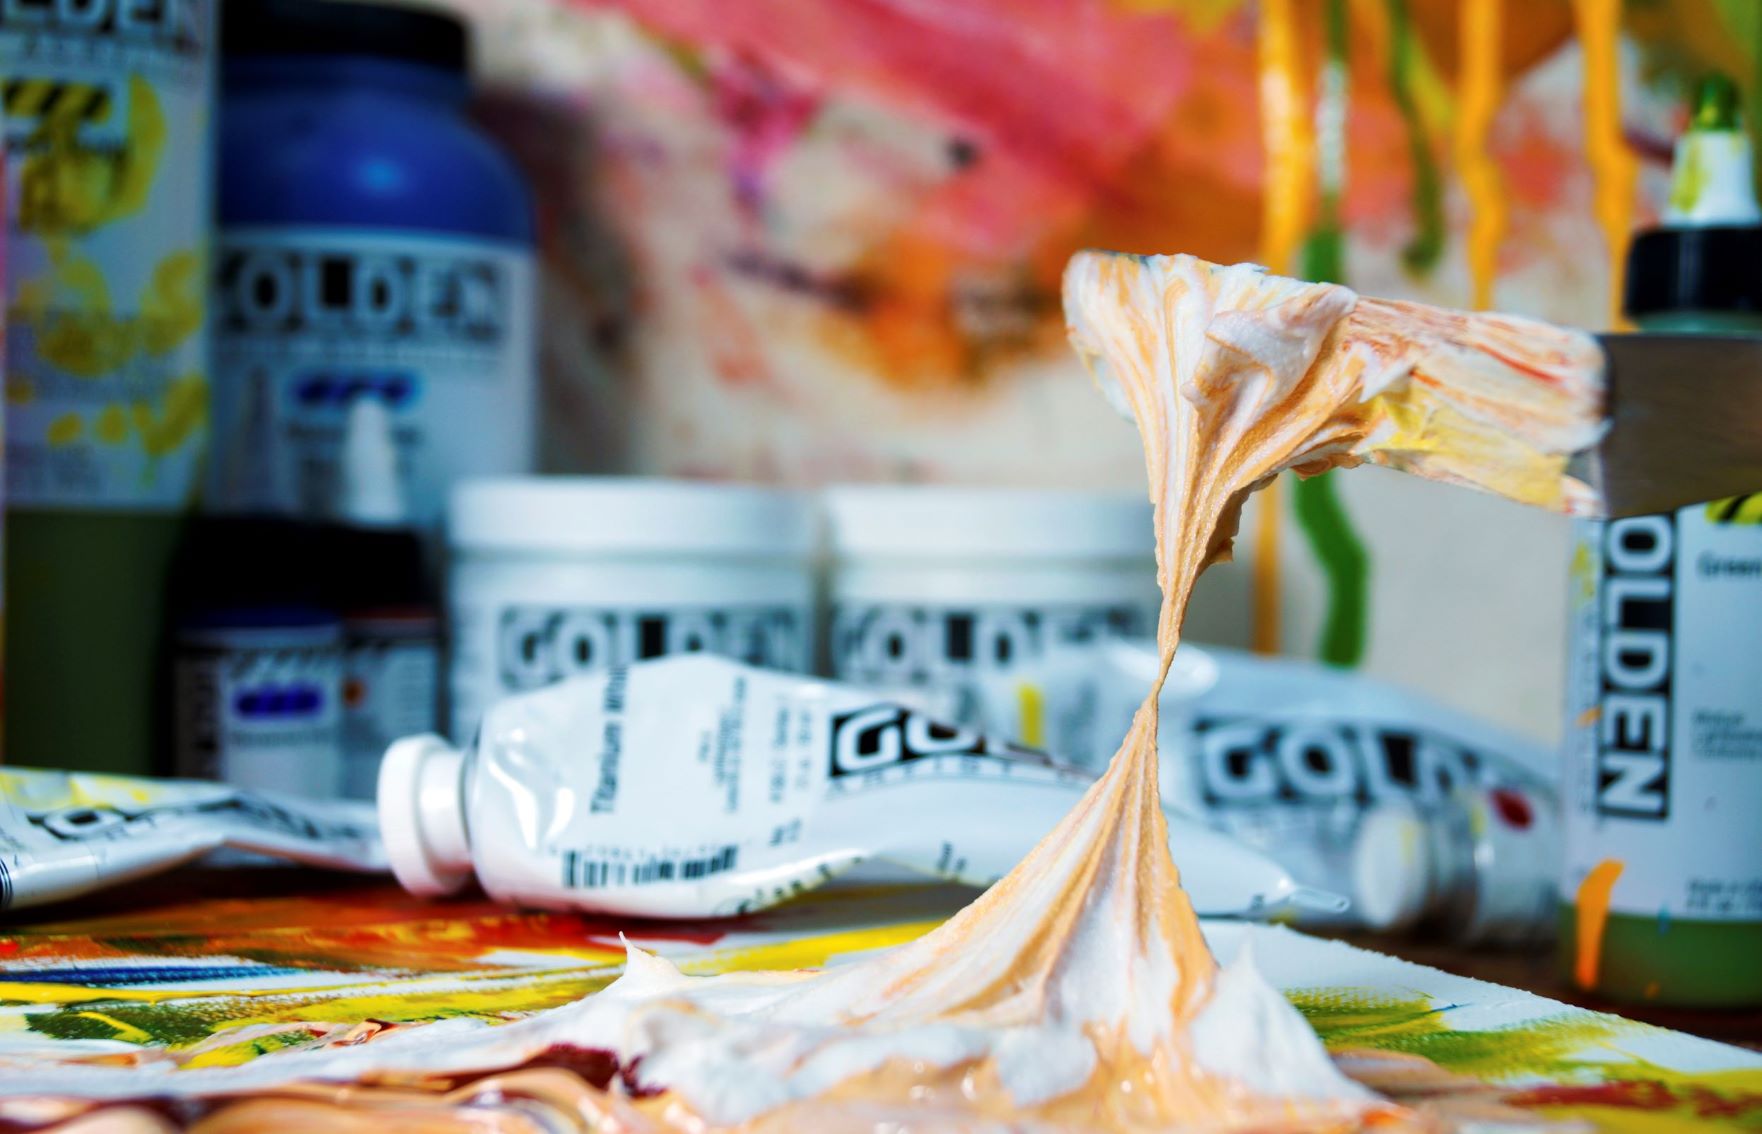 molding paste and paints